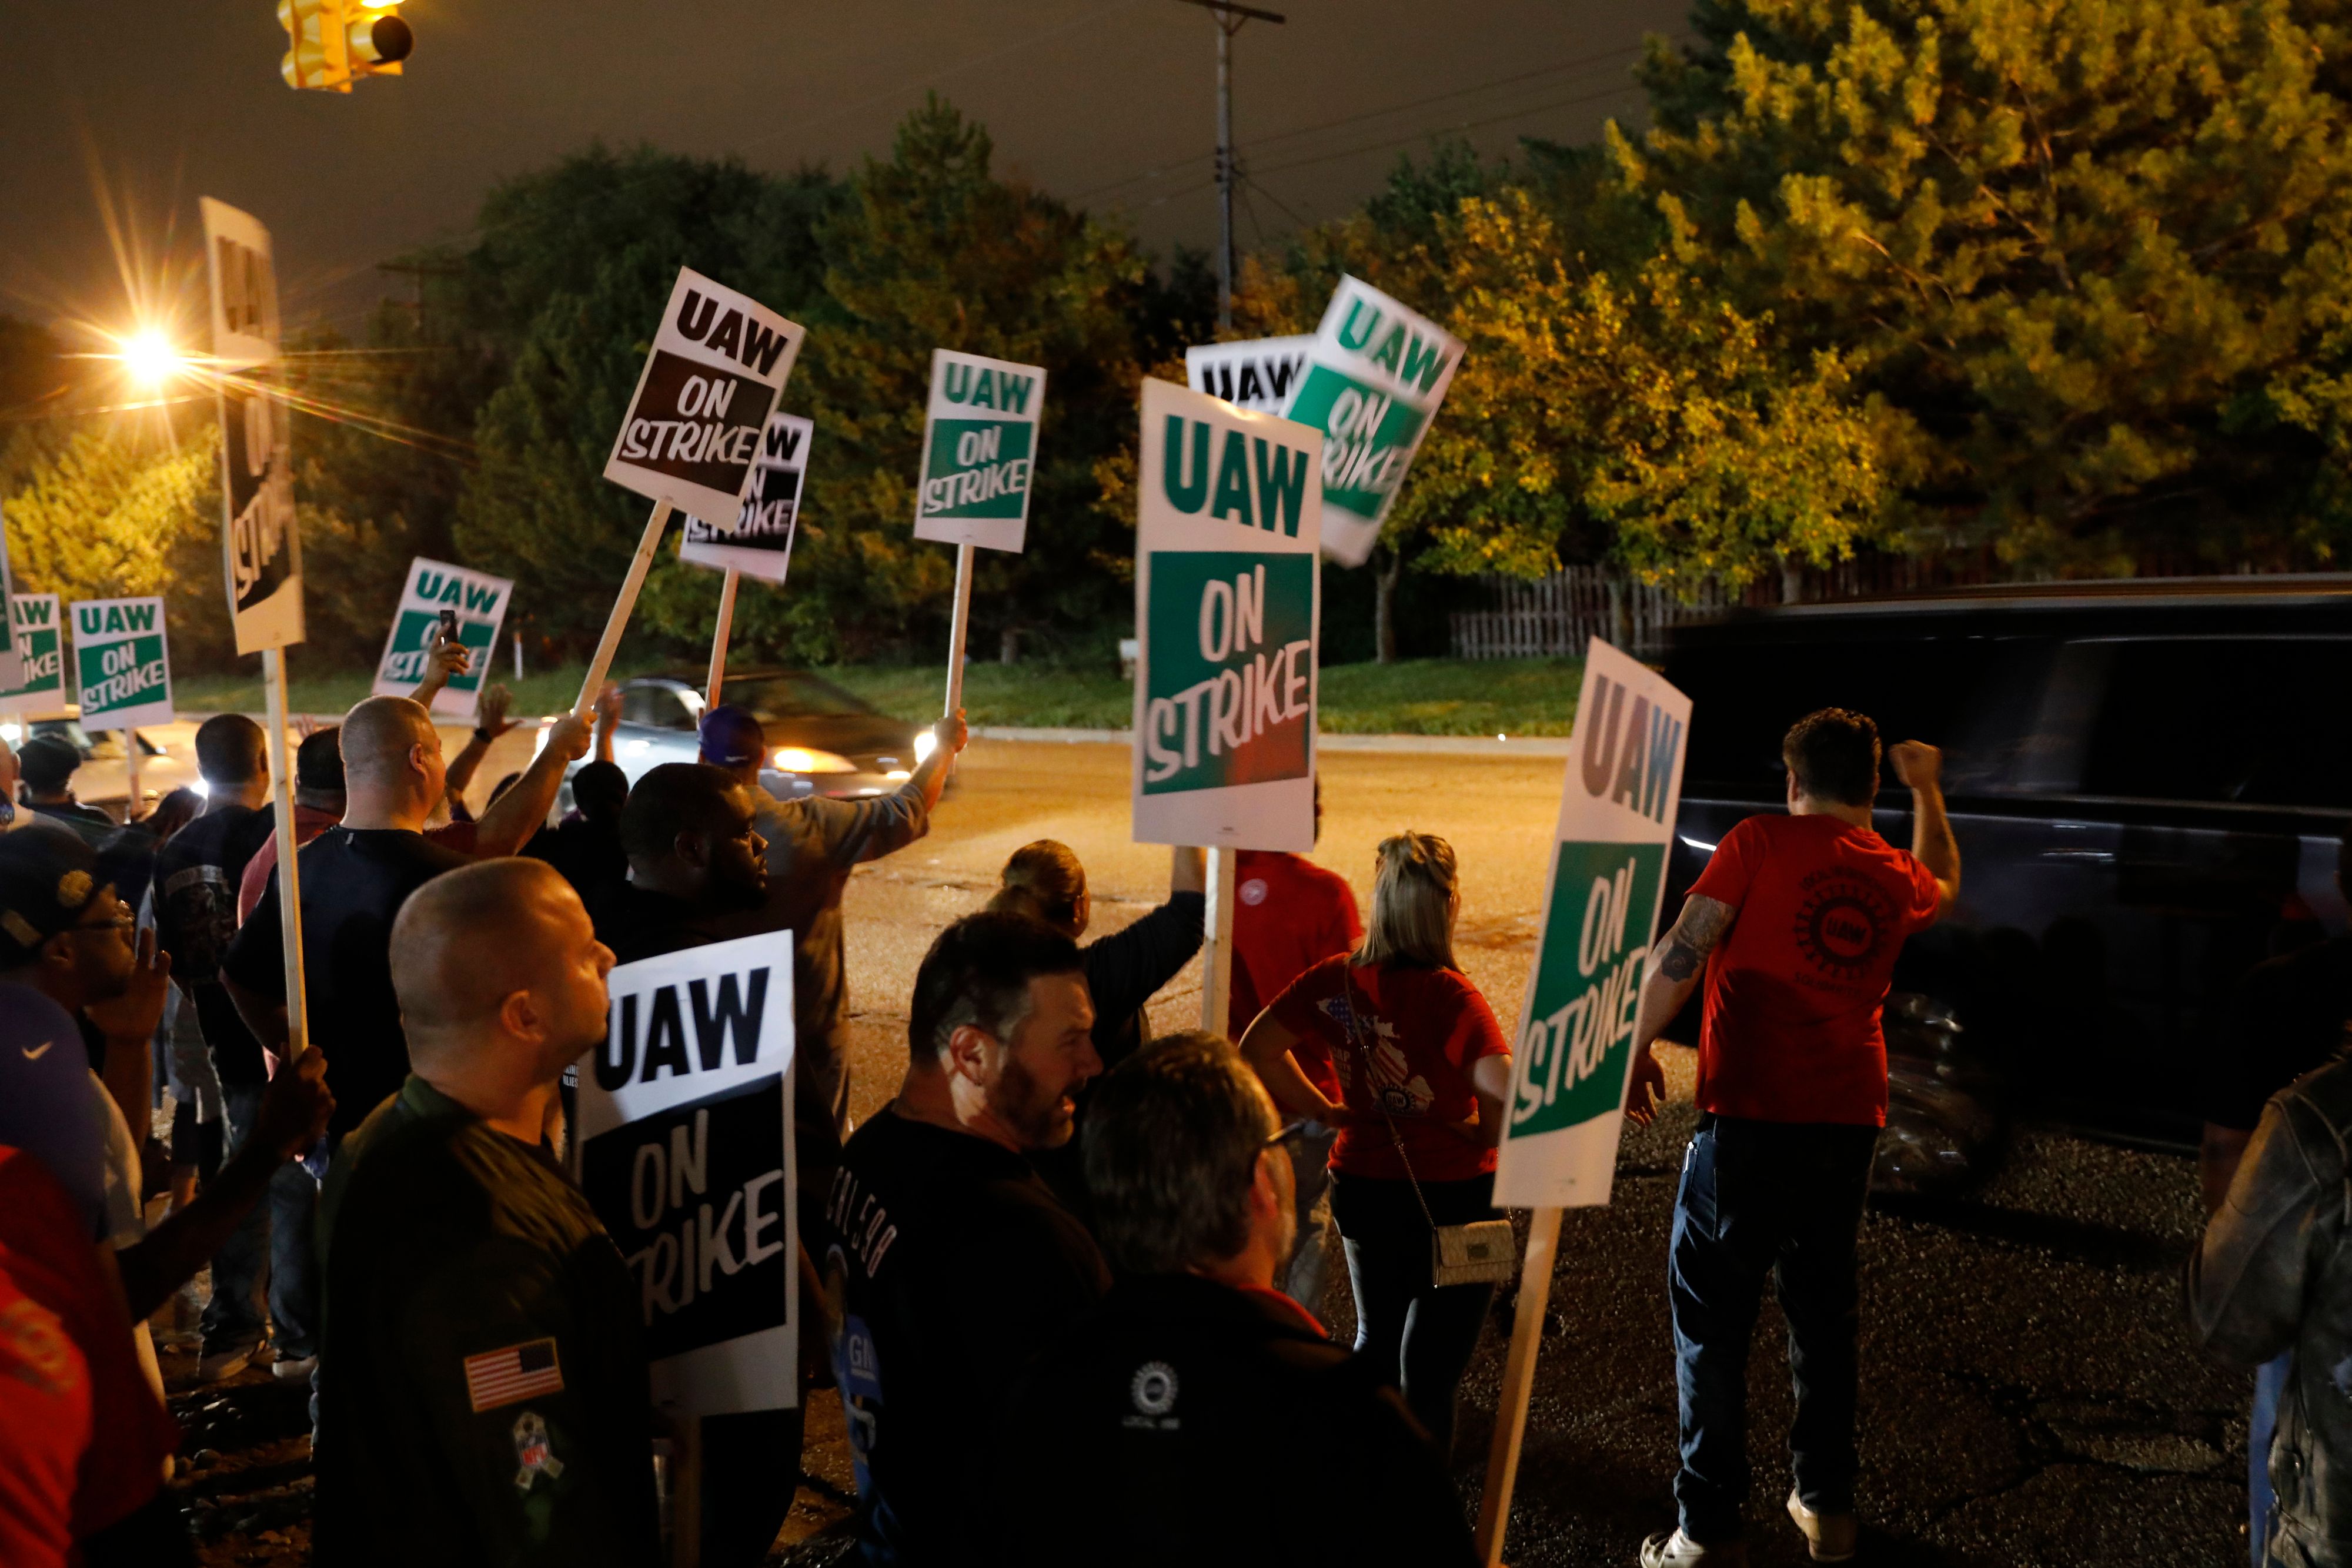 Members of the United Auto Workers (UAW) who are employed at the General Motors Co. Flint Assembly plant in Flint, Michigan, hold signs and cheer as workers drive out of the plant as they go on strike early on September 16, 2019. - The United Auto Workers union began a nationwide strike against General Motors on September 16, with some 46,000 members walking off the job after contract talks hit an impasse. (Photo by JEFF KOWALSKY / AFP) (Photo credit should read JEFF KOWALSKY/AFP/Getty Images)